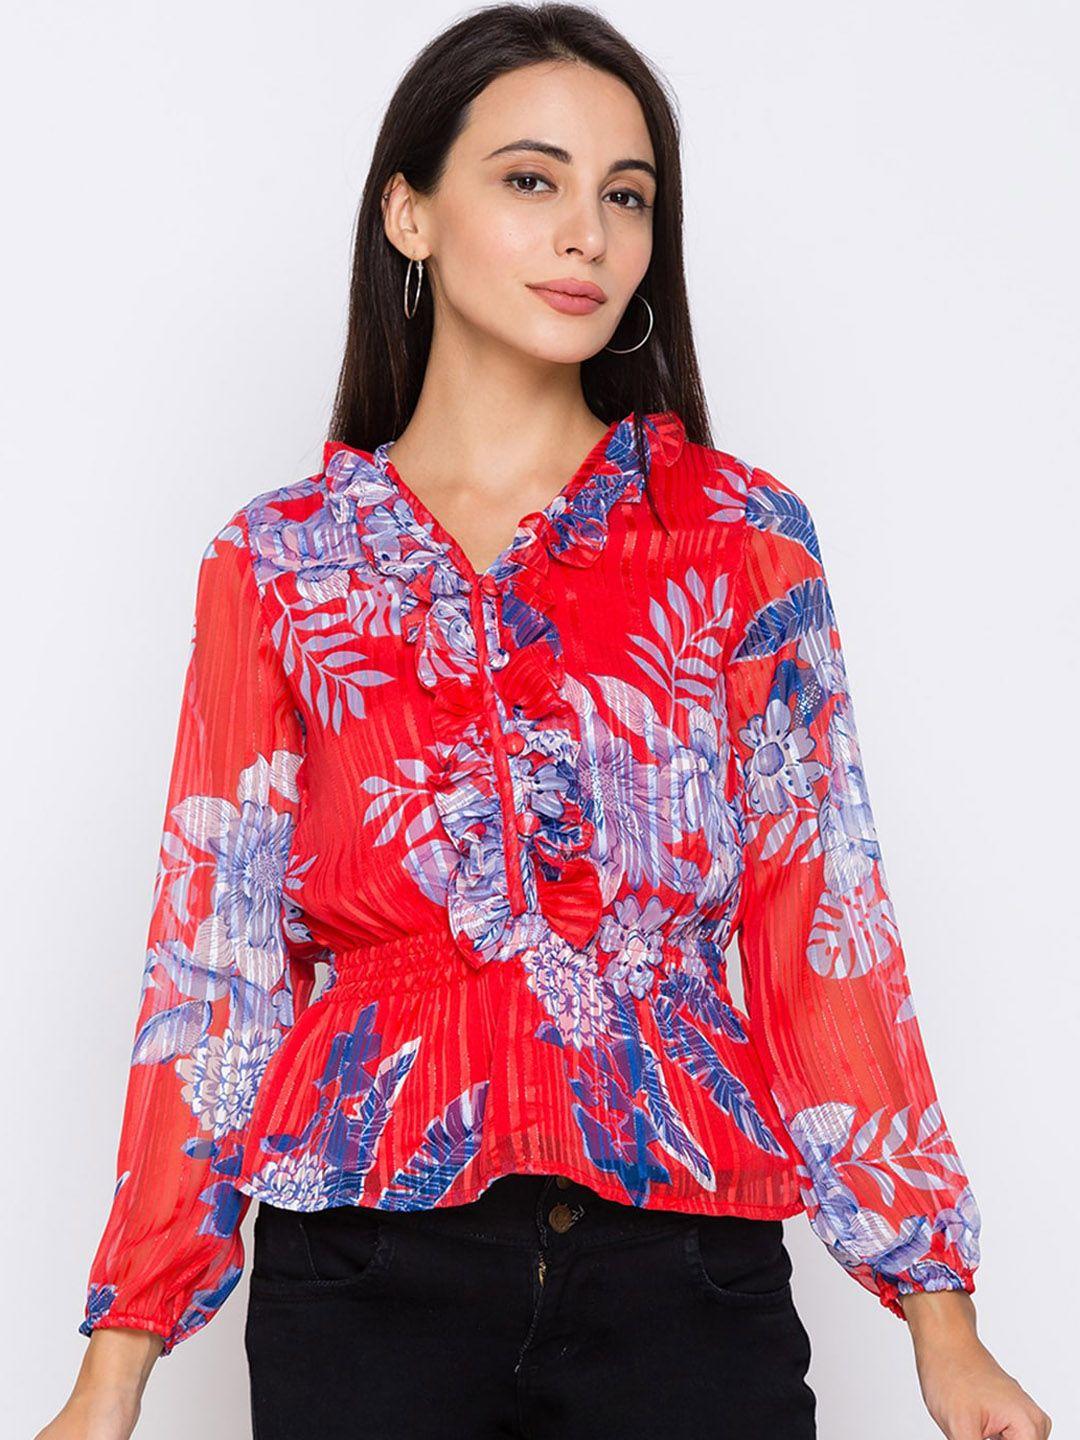 globus red floral cinched waist top